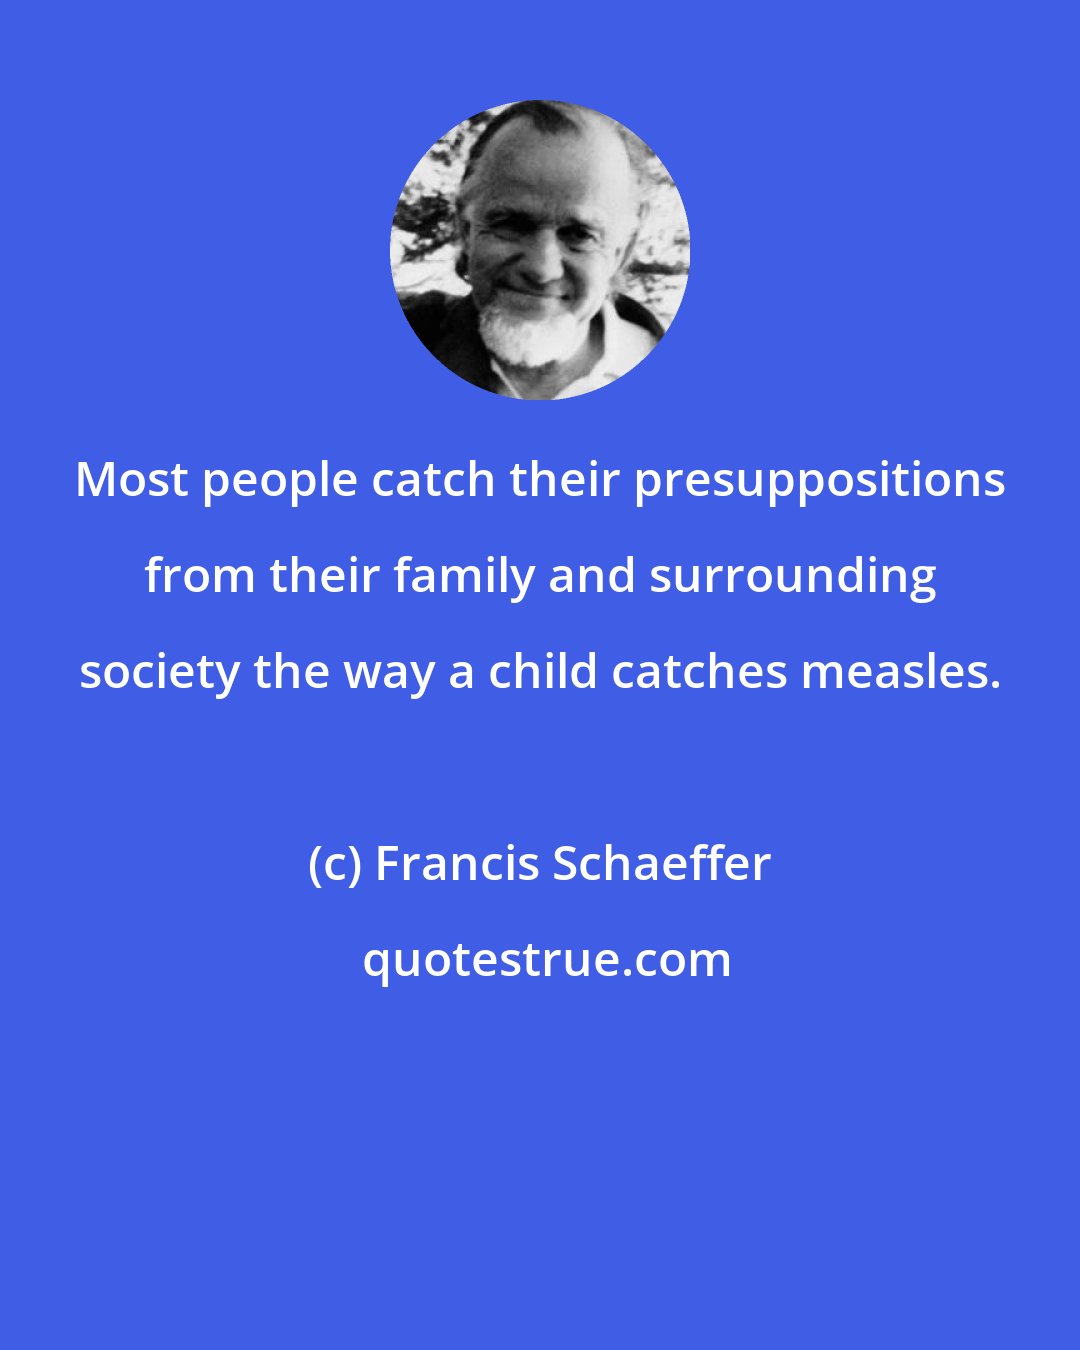 Francis Schaeffer: Most people catch their presuppositions from their family and surrounding society the way a child catches measles.